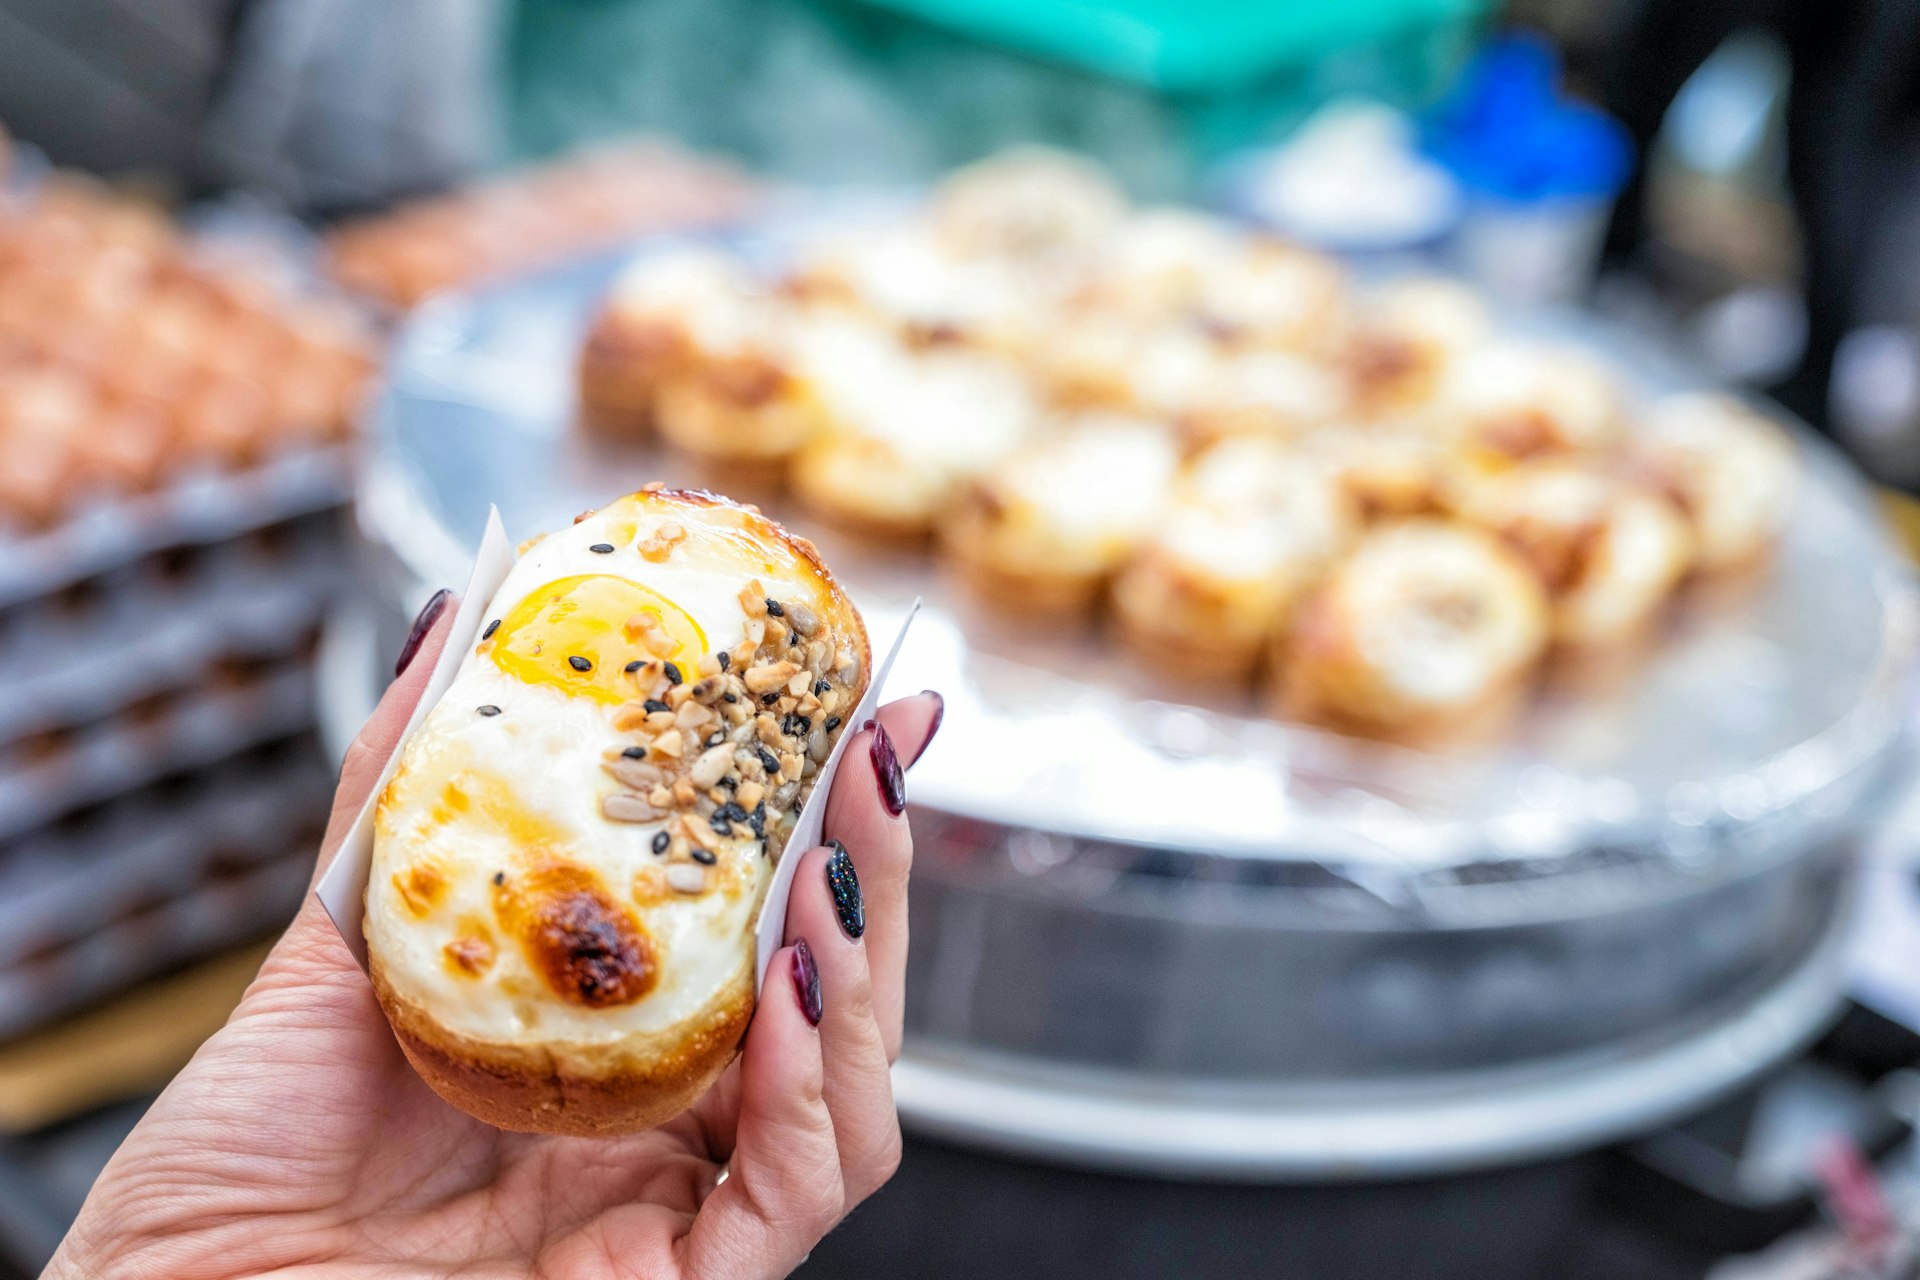 Egg bread with almond, peanut and sunflower seed at Myeong-dong Street, Seoul, South Korea